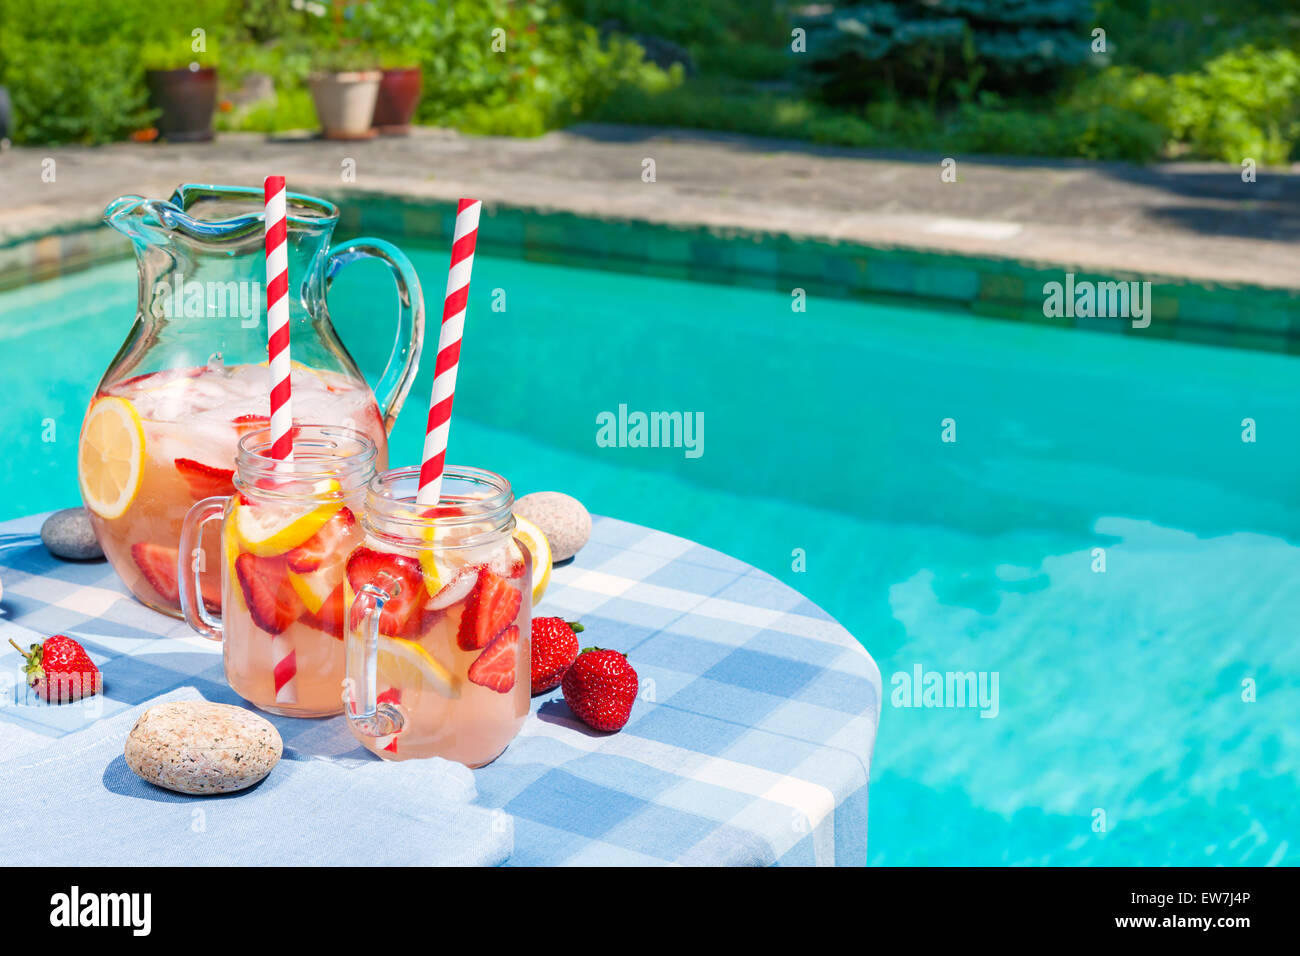 Ice cold homemade strawberry lemonade in jug and glasses with paper straws on outdoor summer pool side table plus copy space Stock Photo